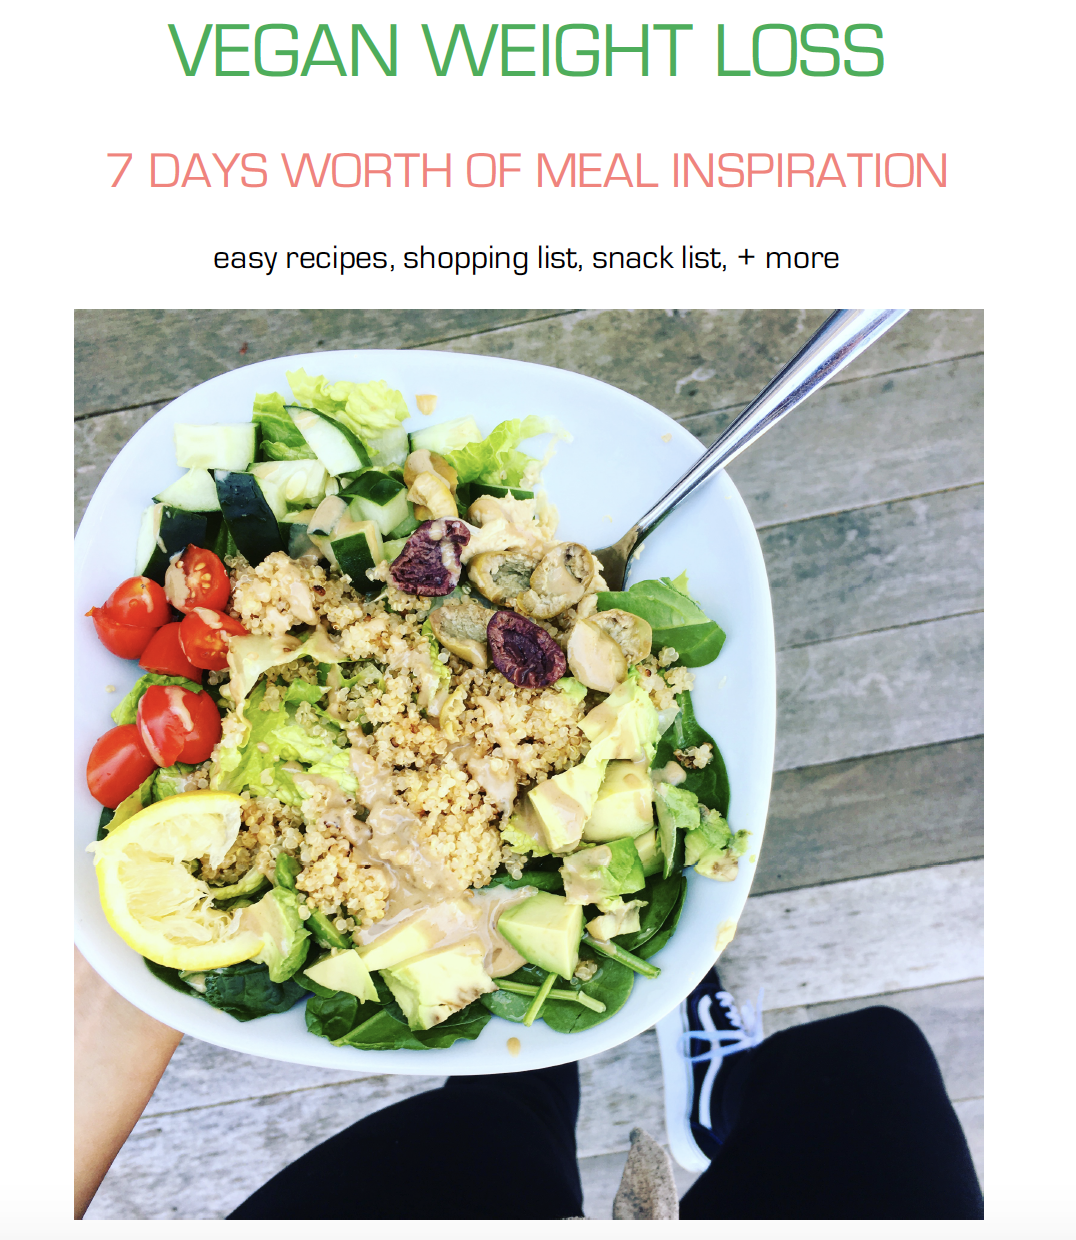 E-BOOK! Vegan Weight Loss: 7 Days Worth of Meal Inspiration